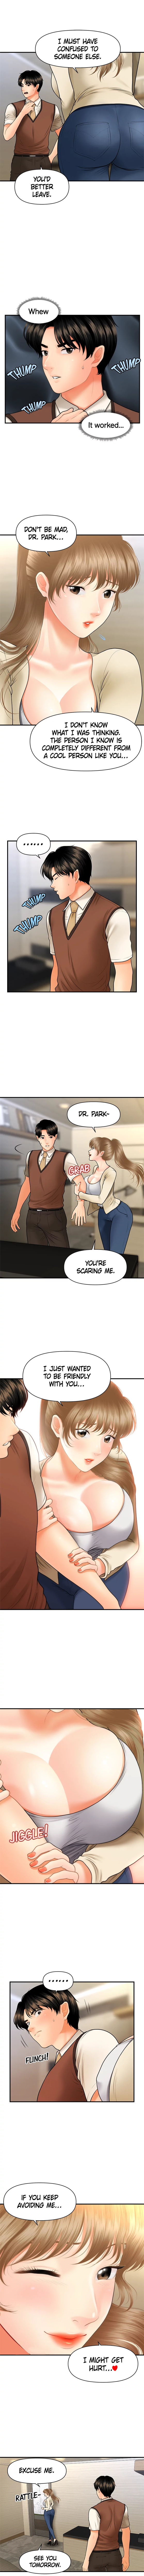 You’re so Handsome - Chapter 26 Page 4